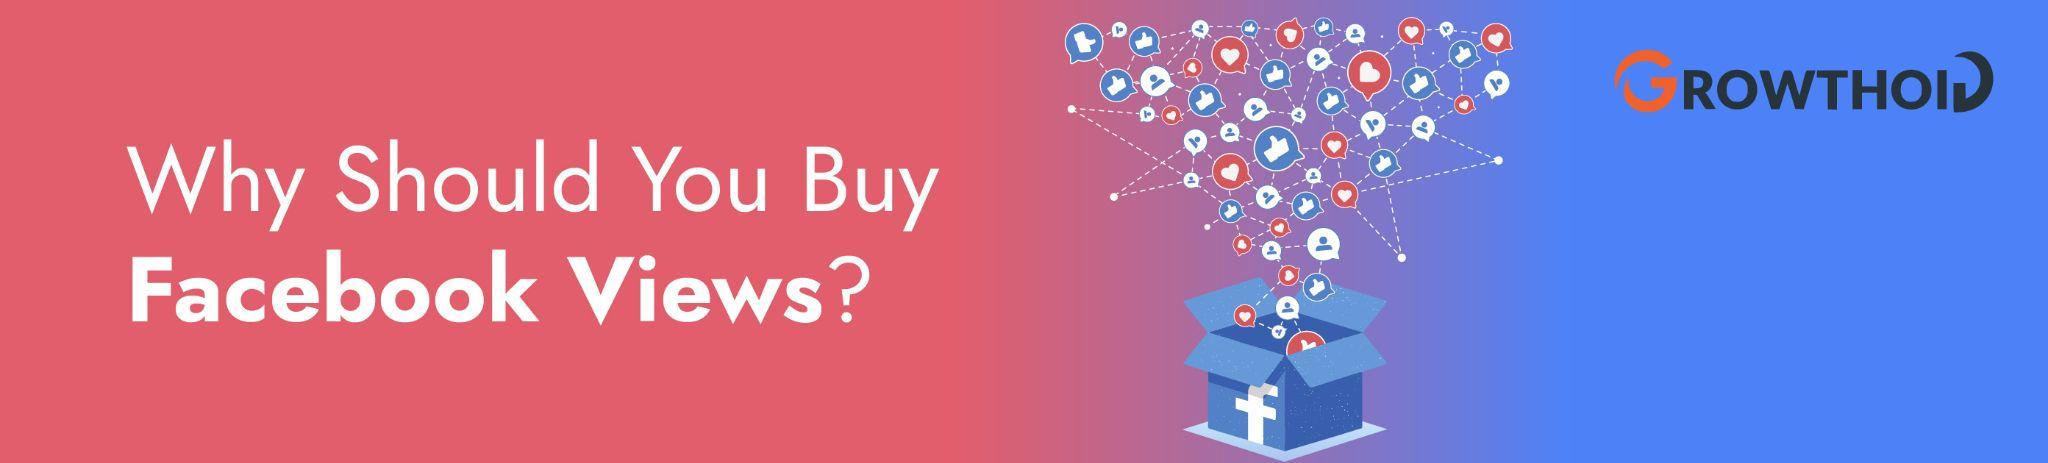 Why Should You Buy Facebook Views?